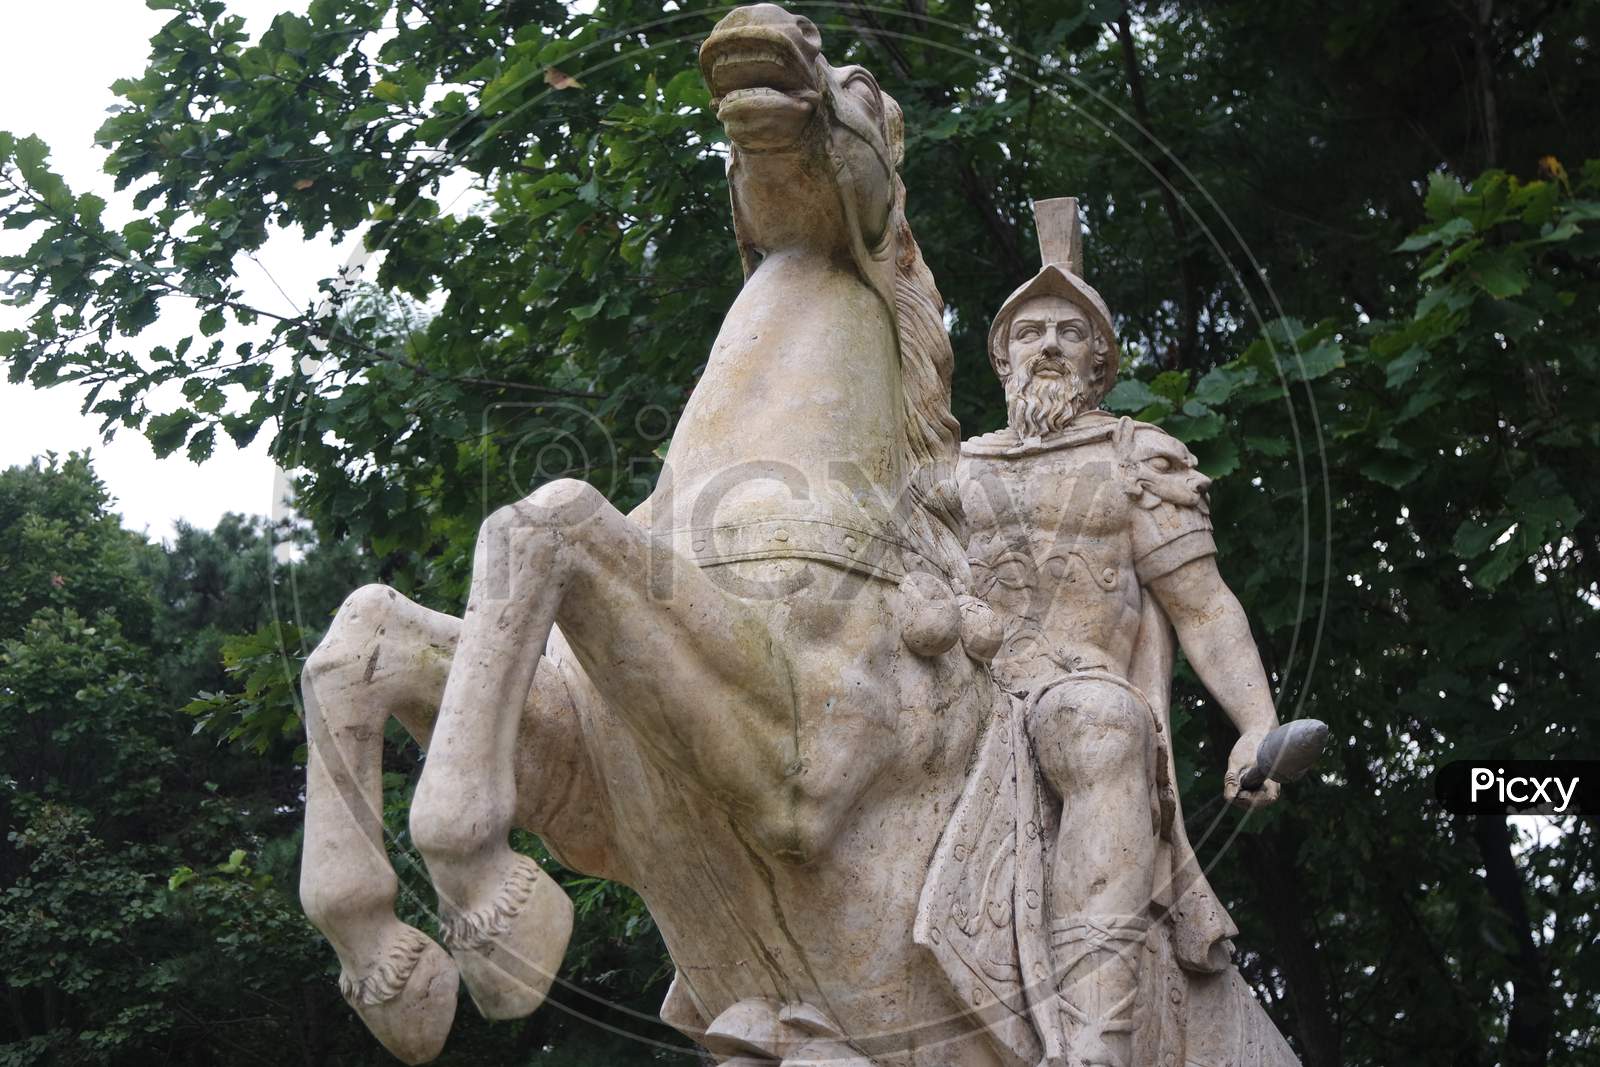 White Marble Statue Of An Ancient Man Holding A Scroll And Riding A Horse